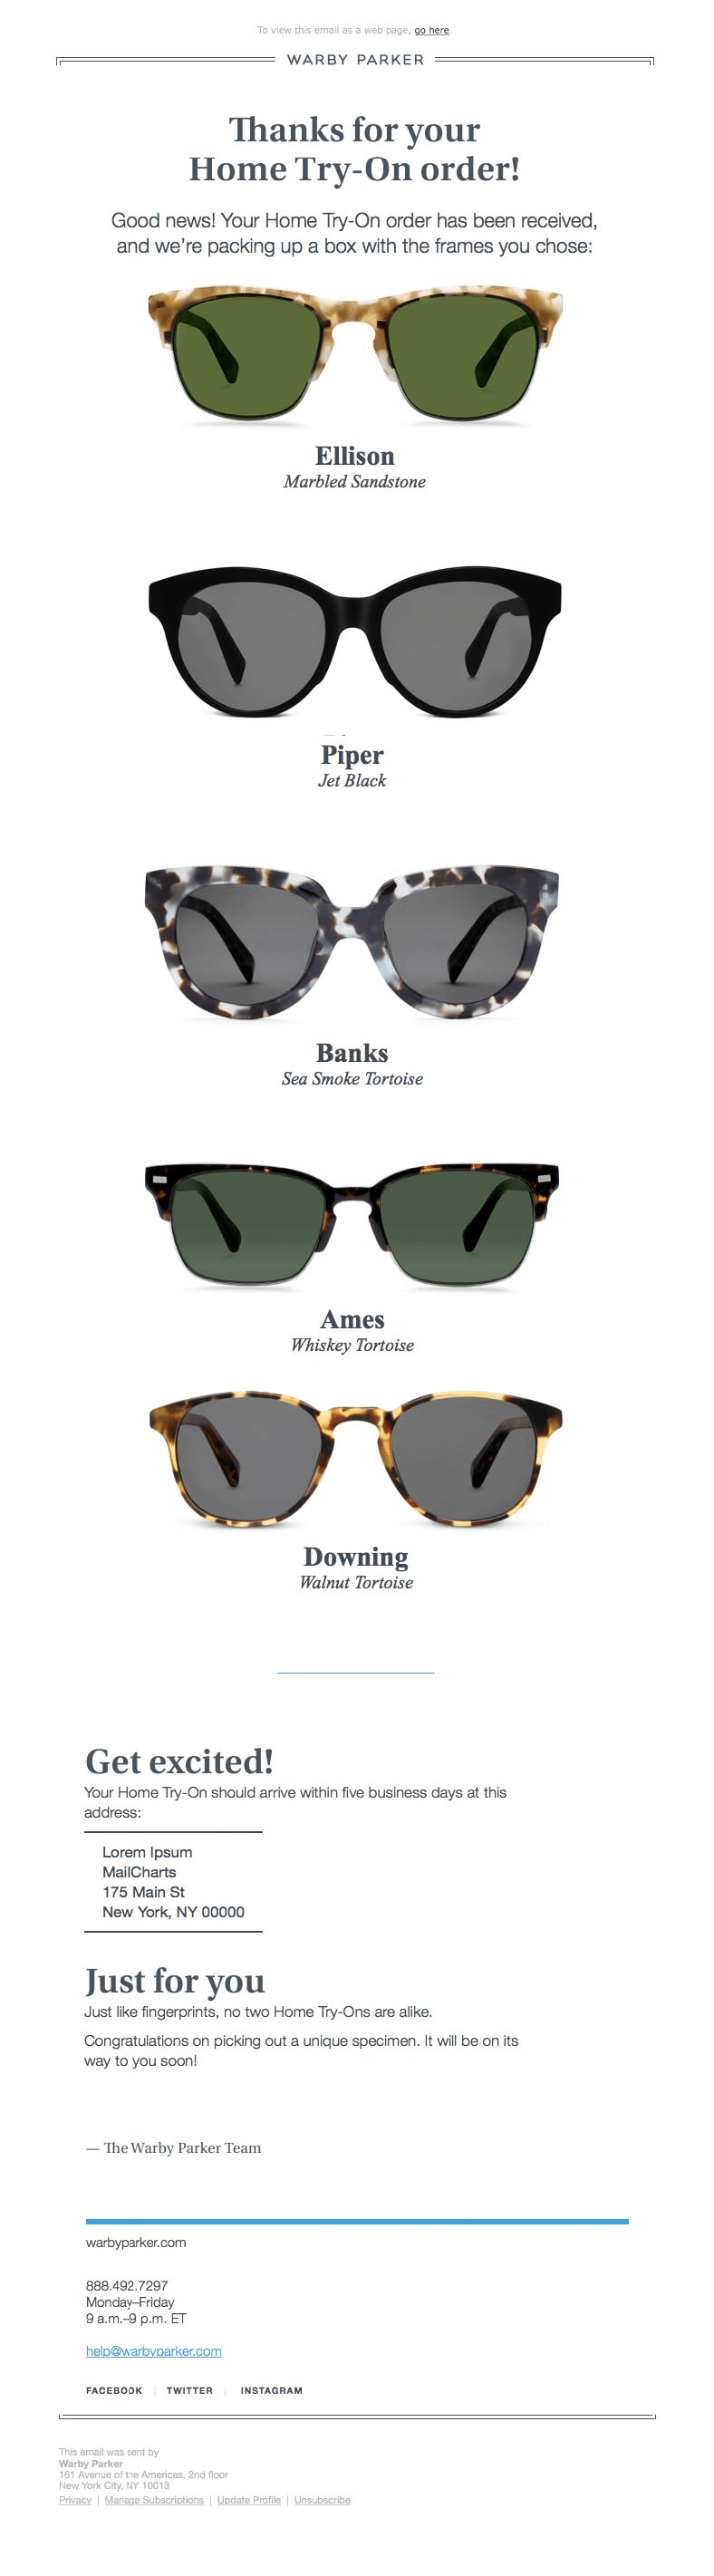 Warby Parker transactional email